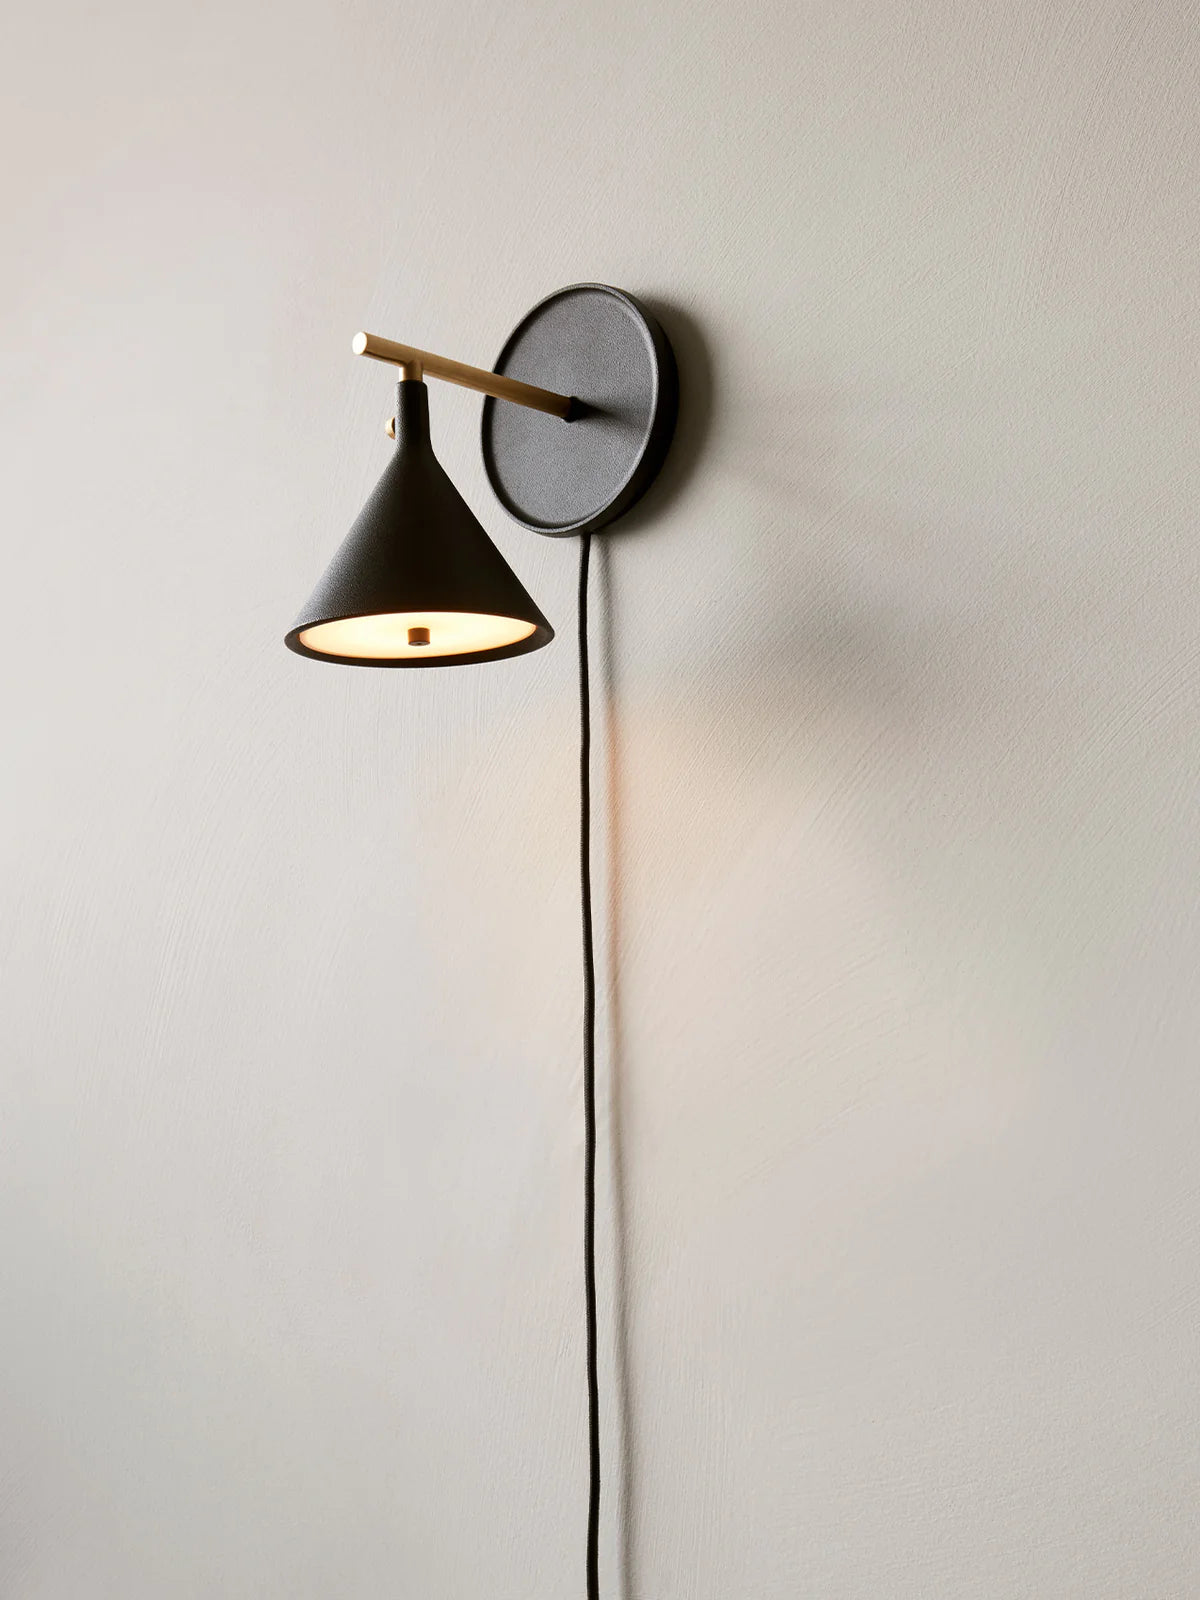 Menu Cast Sconce Wall Lamp Diffuser, dimmer with light turned on.